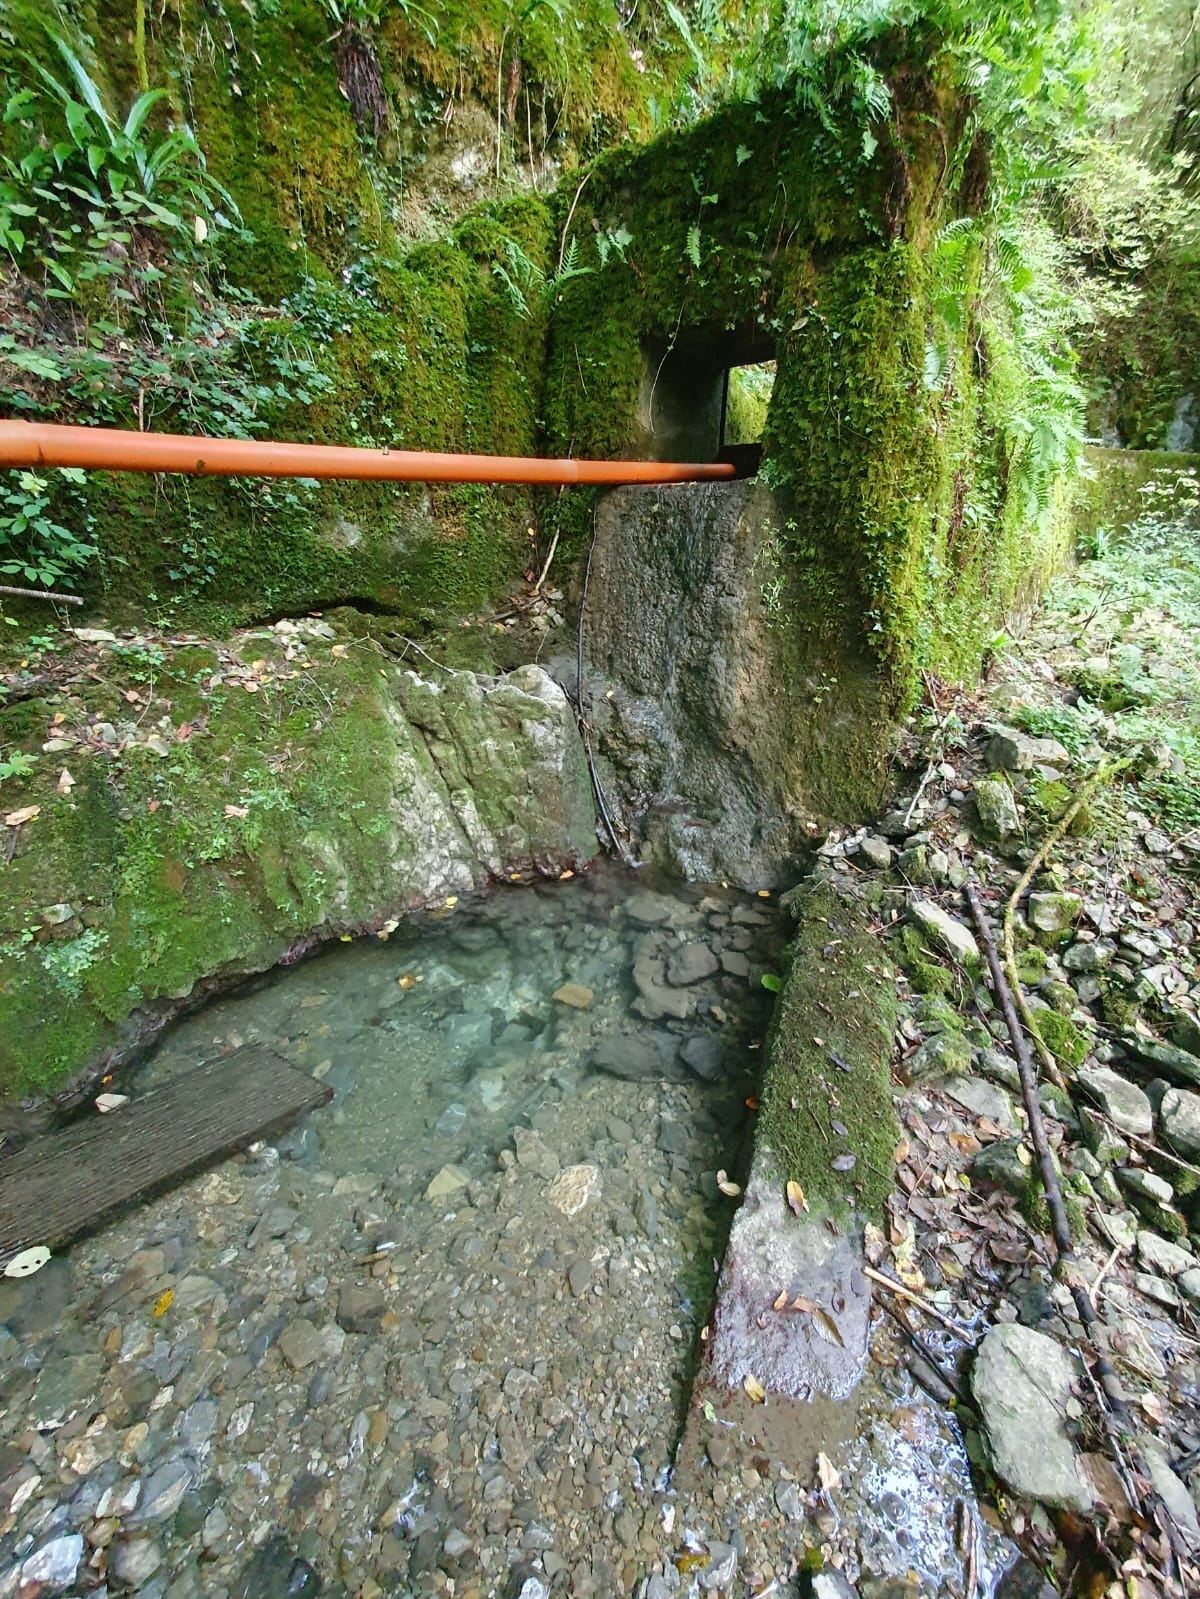 the deep pool beneath the sluice, the water is so clear as to almost be blue, and ferns, ivies and mosses grow all around